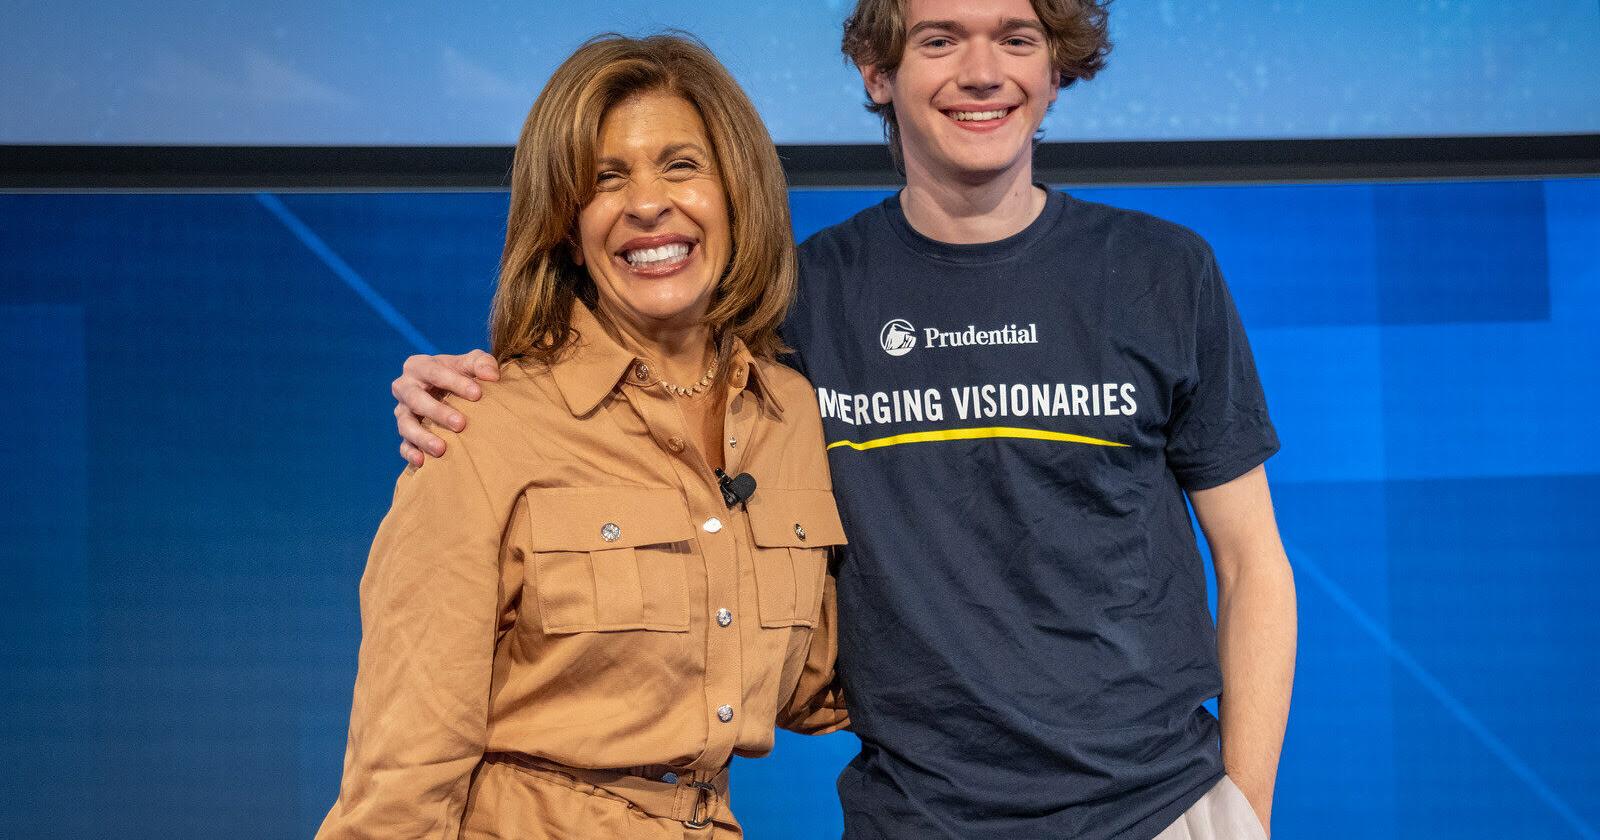 Wealth of knowledge: Teen recognized for helping educate others about cryptocurrency